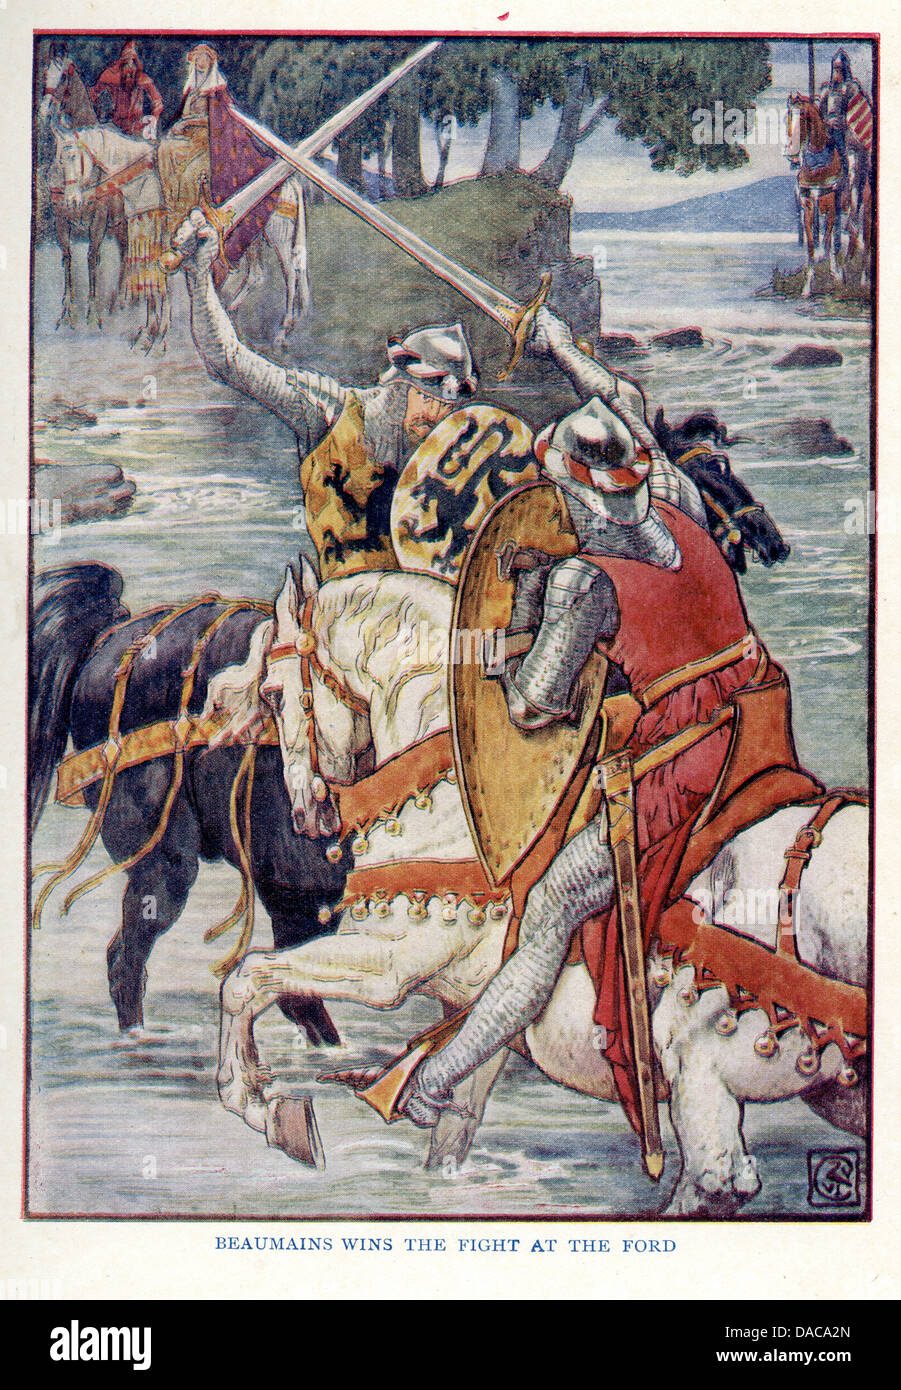 Beaumains wins the fight at the Ford, King Arthur's Knights, Walter Crane Stock Photo